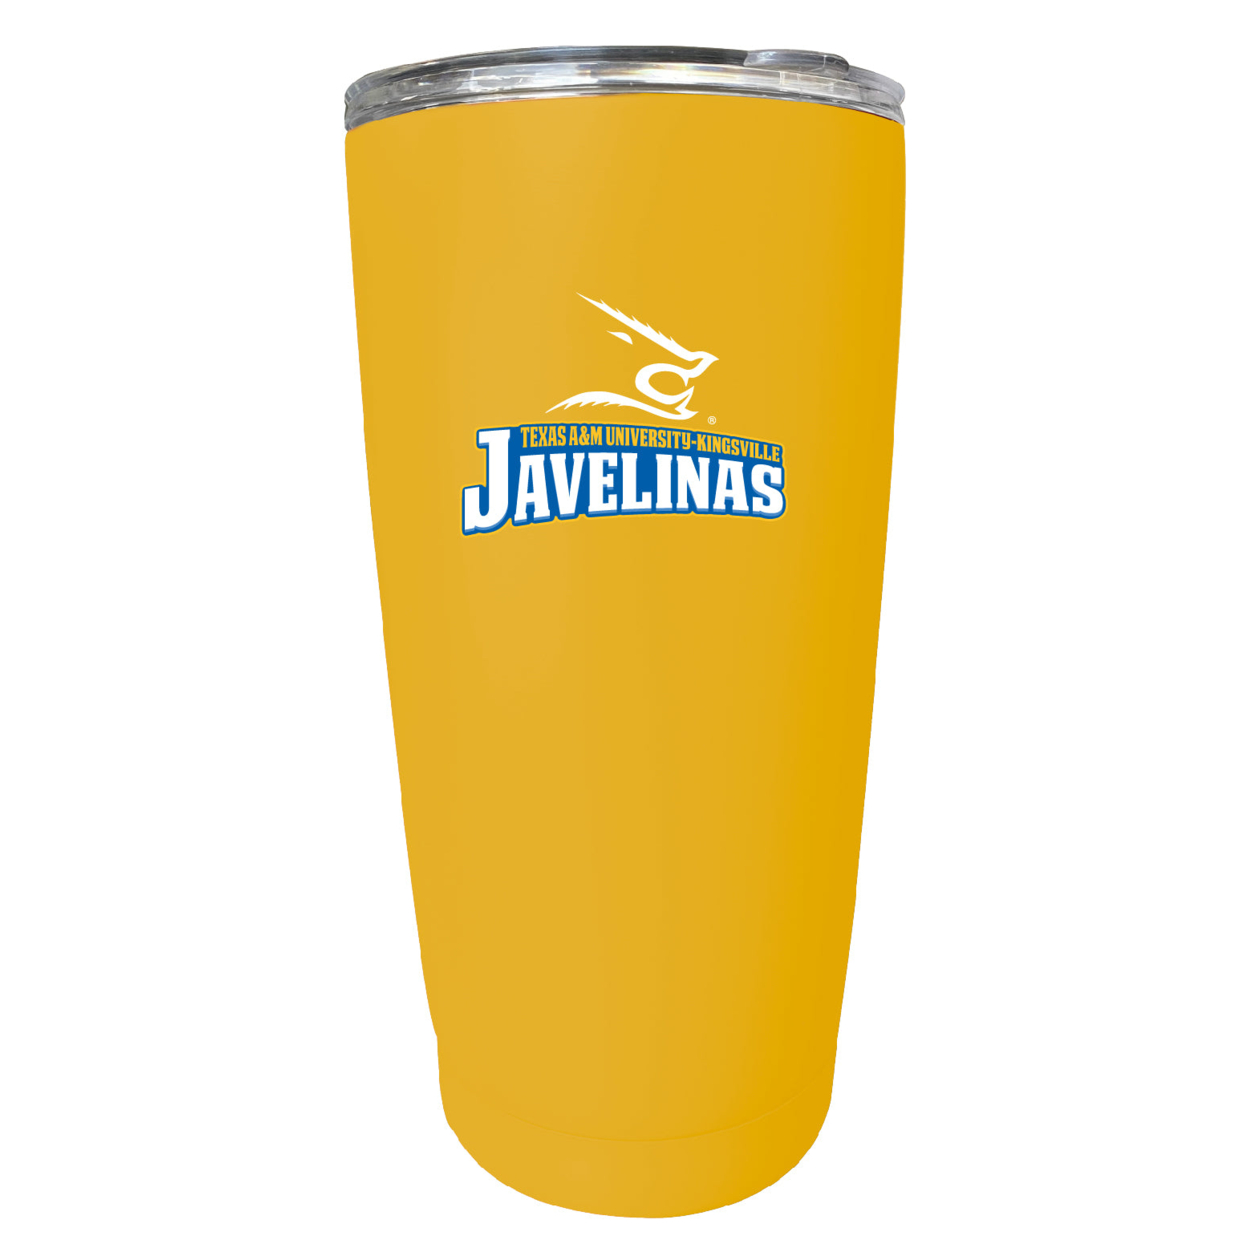 Texas A&M Kingsville Javelinas 16 Oz Stainless Steel Insulated Tumbler - Pink